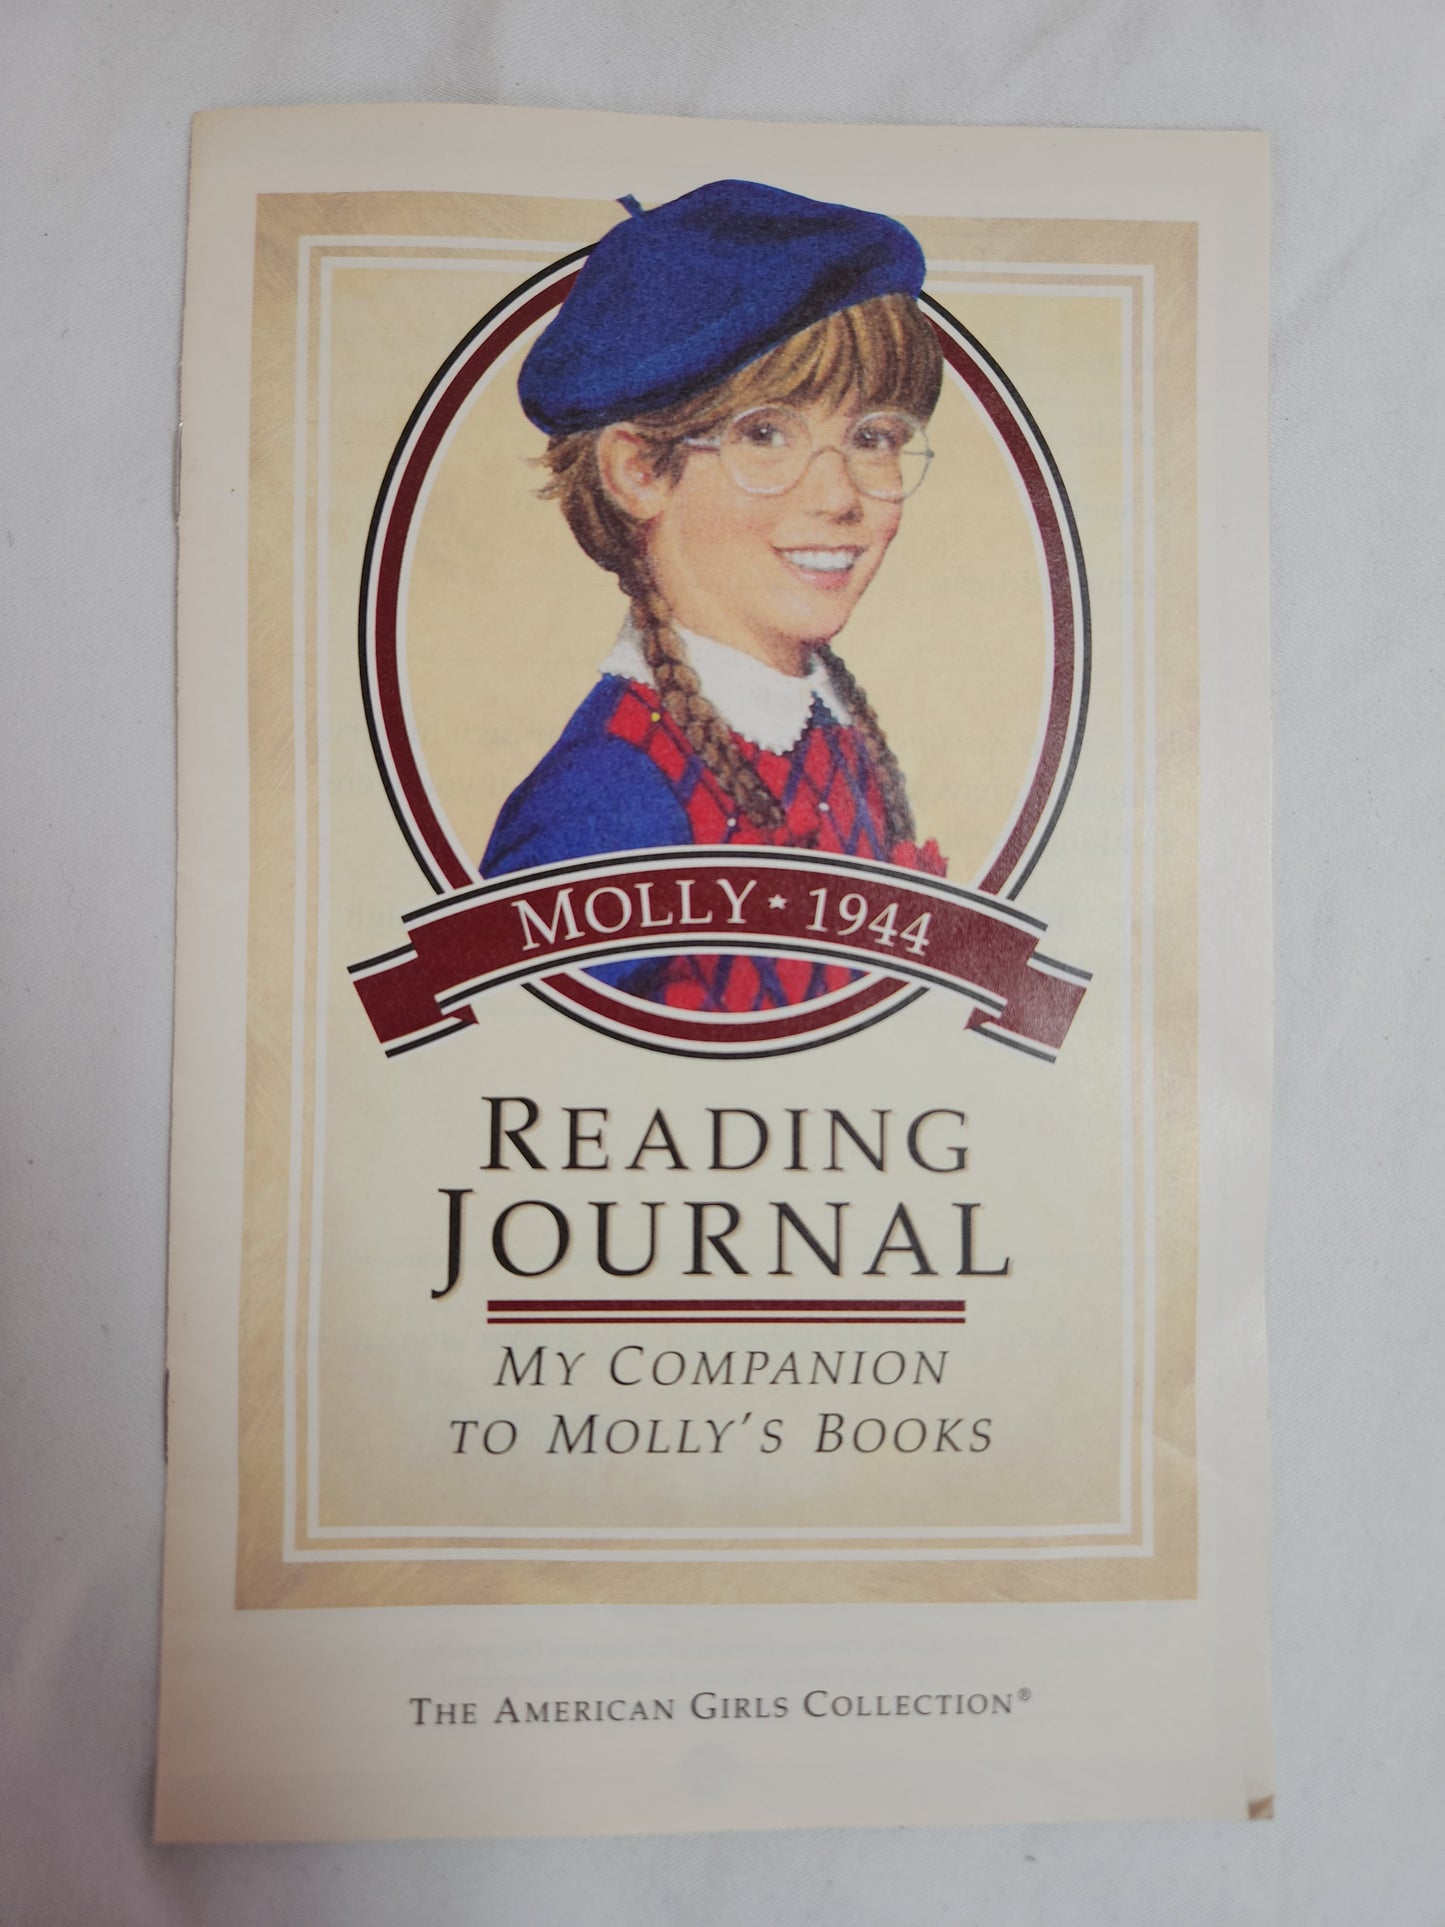 Pleasant Company American Girl Molly-1944 Reading Journal